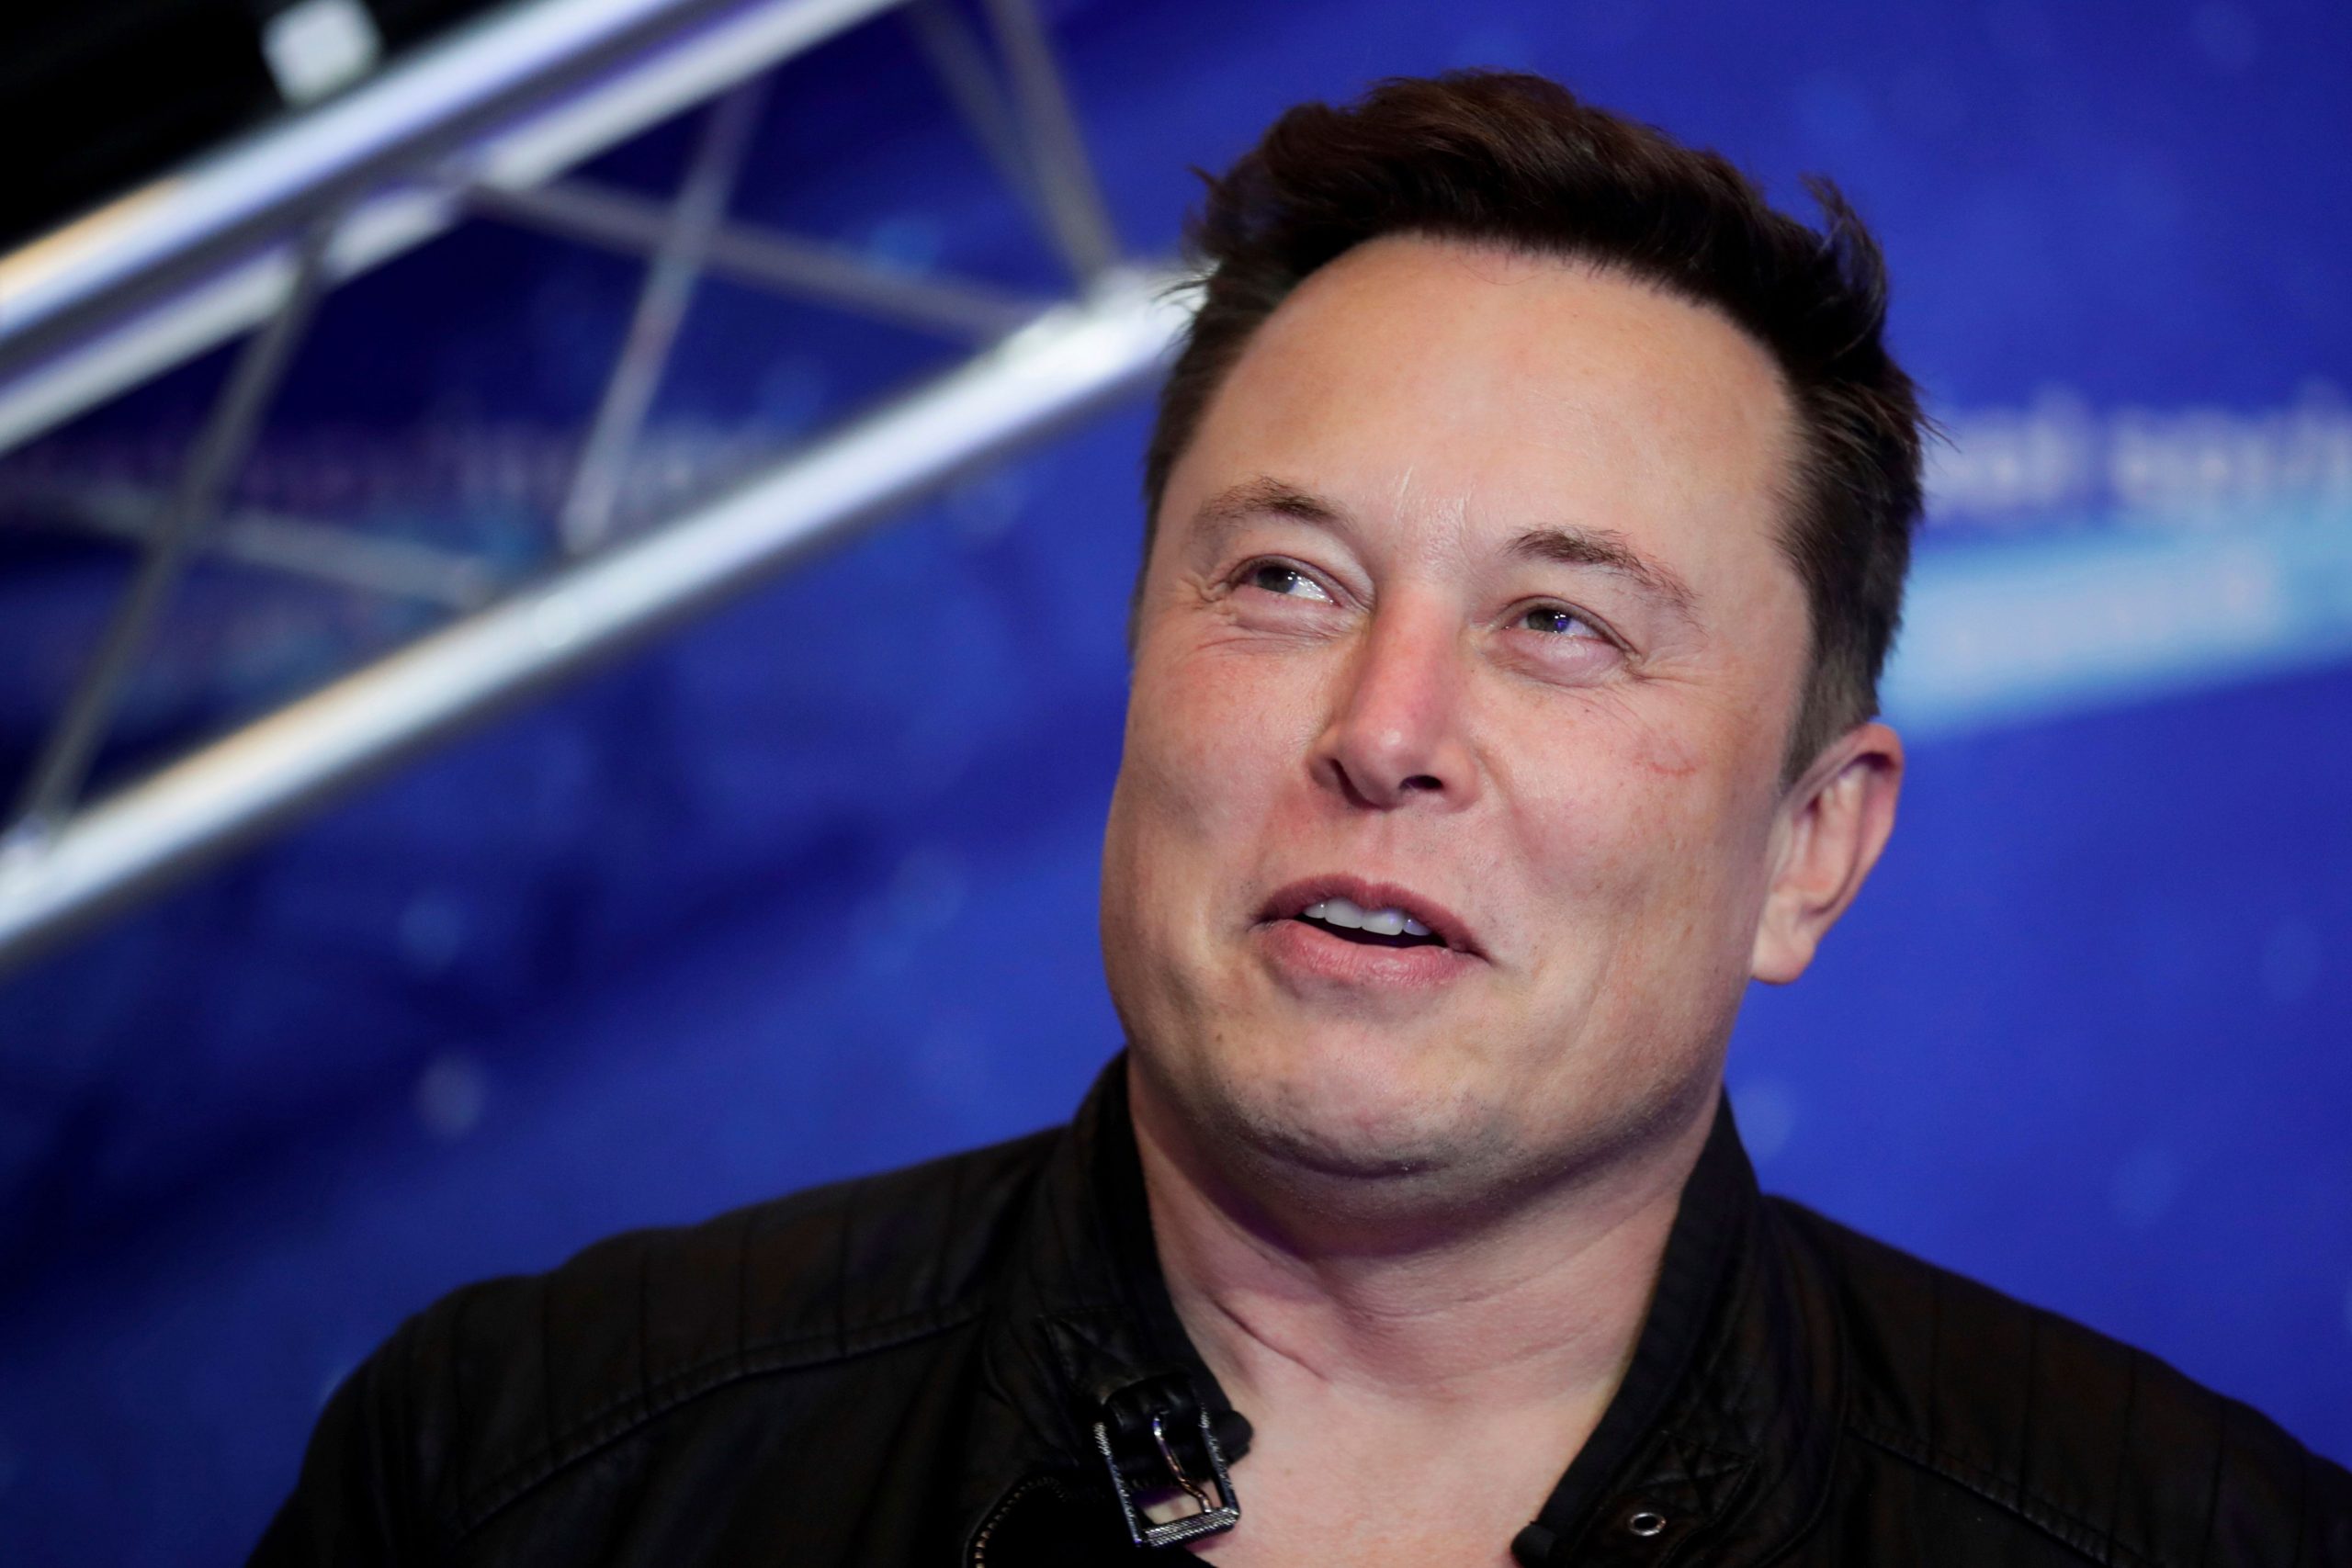 Elon Musk may have to answer questions on Twitter from US Congress after midterms